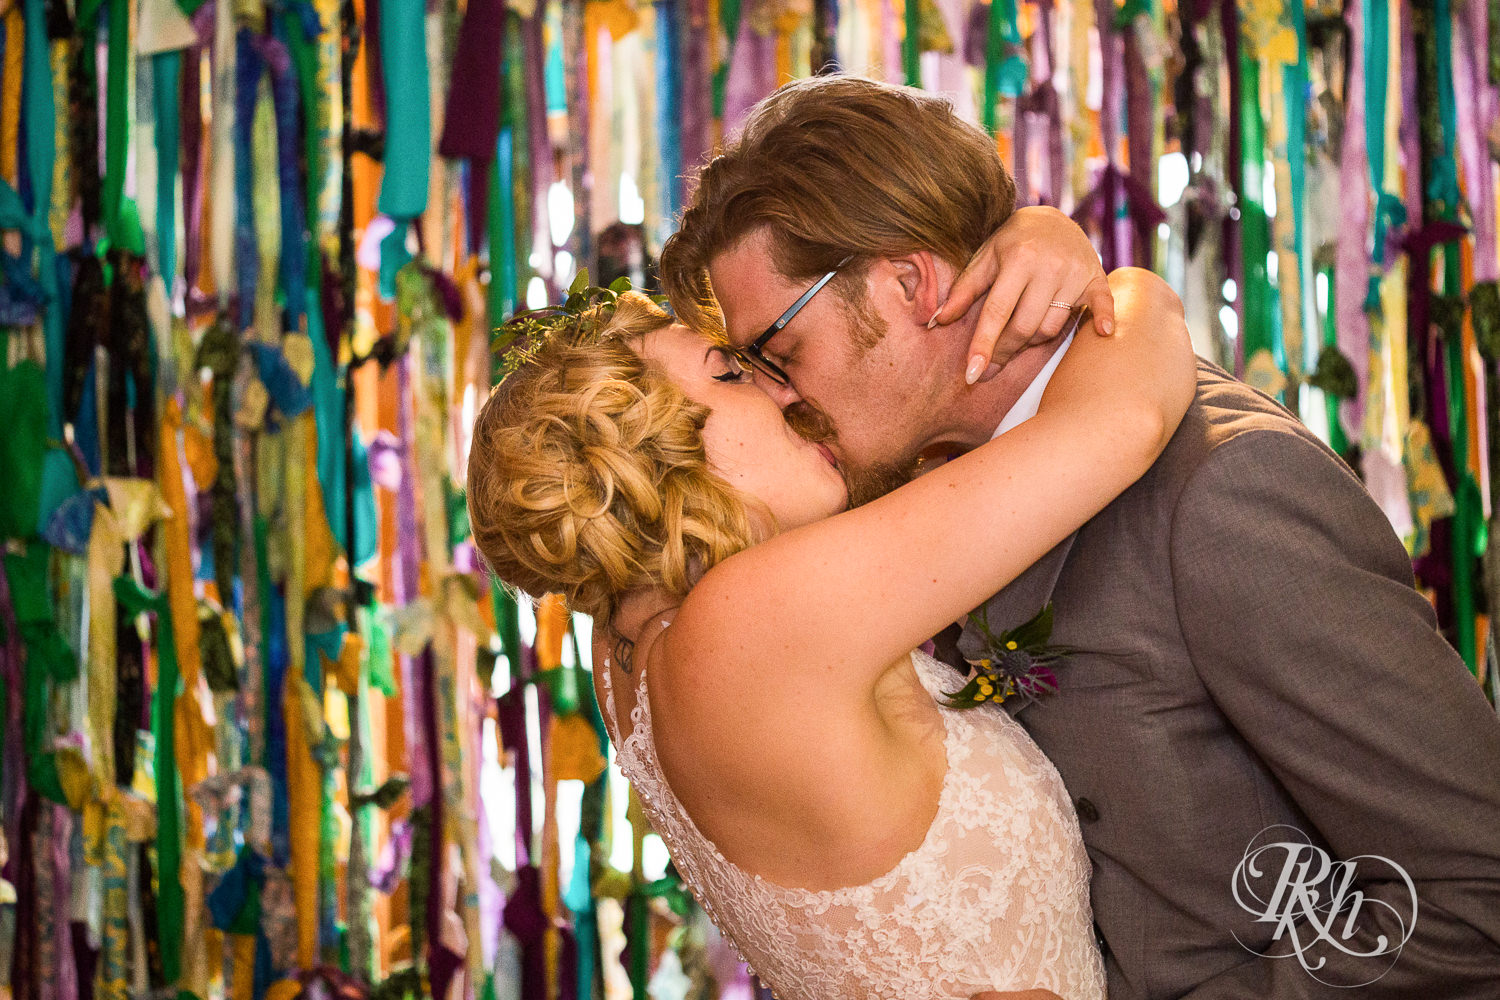 Bride and groom kiss during wedding ceremony at Coops Event Barn in Dodge Center, Minnesota.